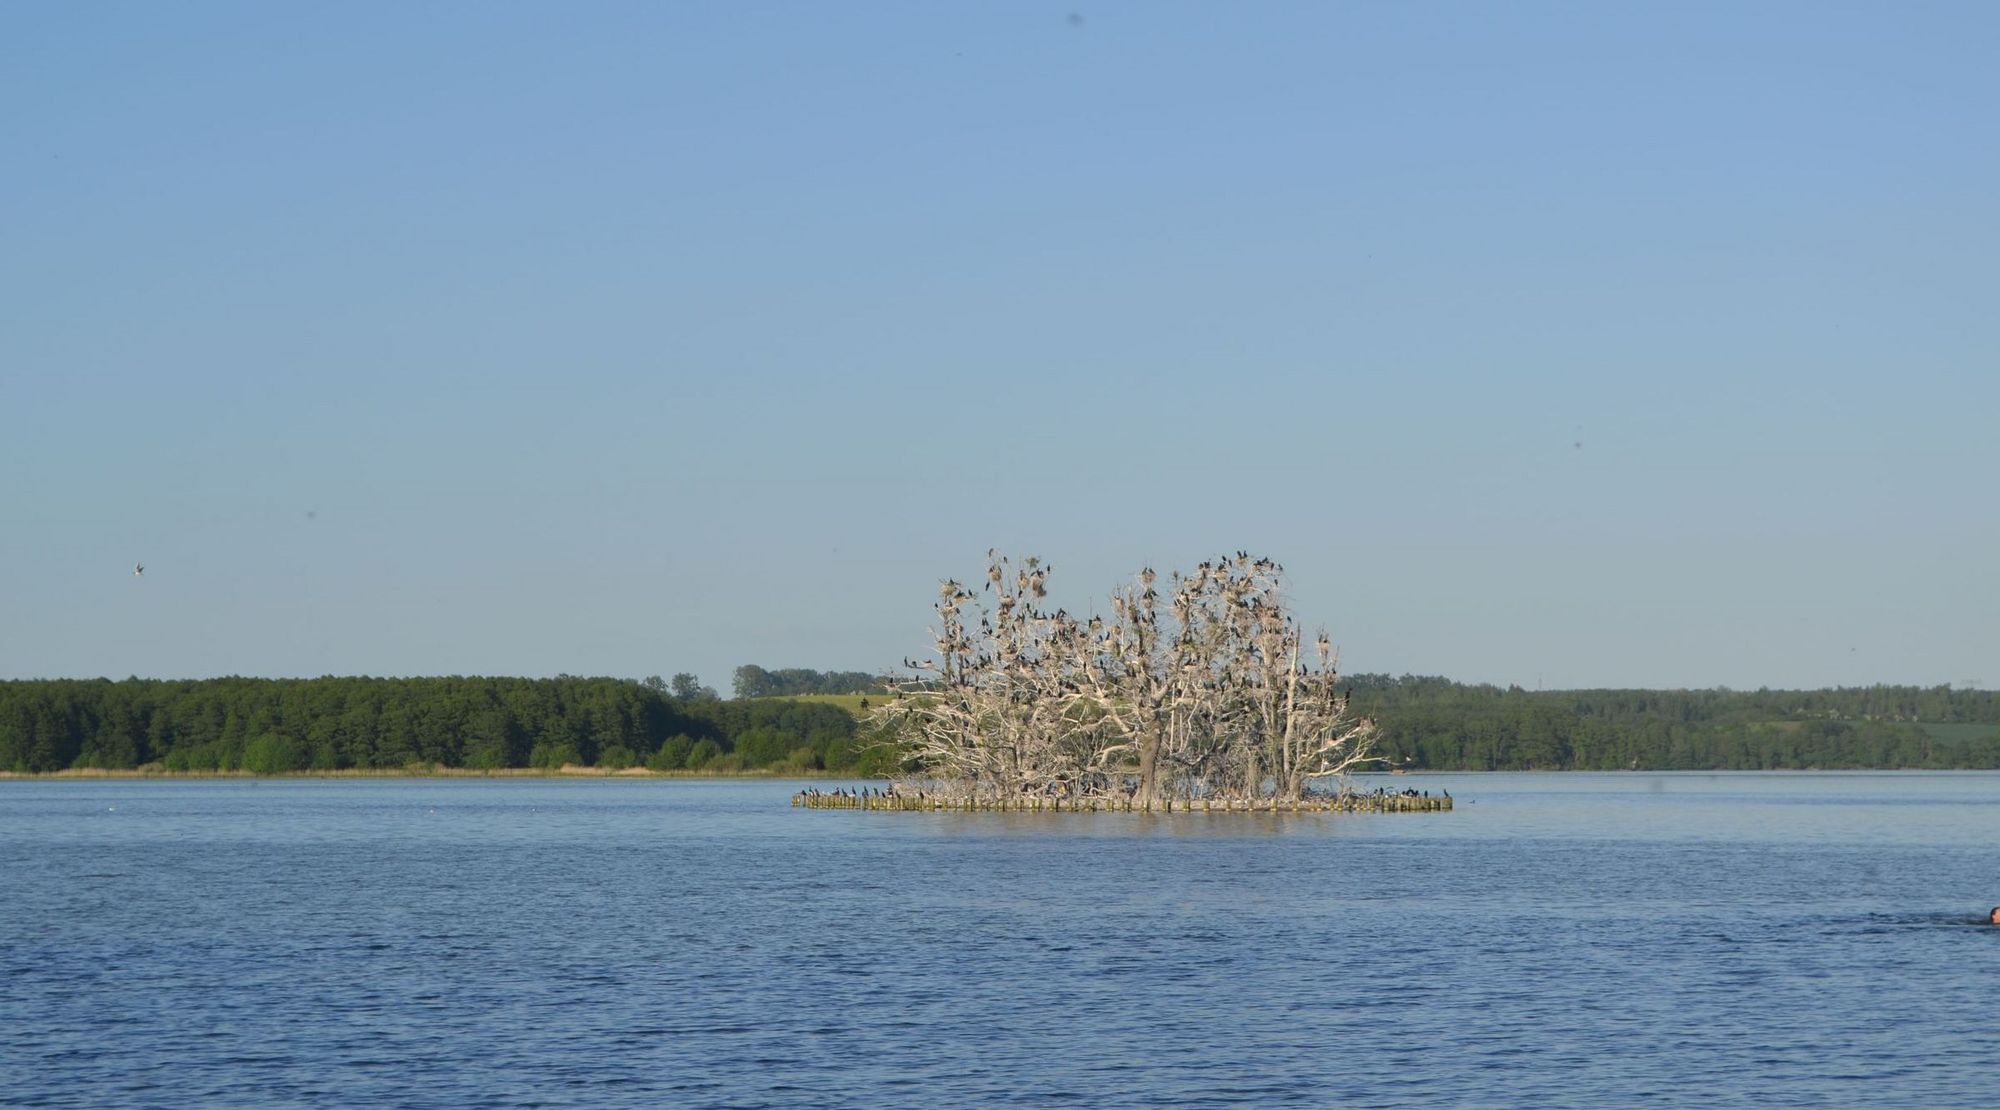 A colony of cormorants on a lake island with dead trees